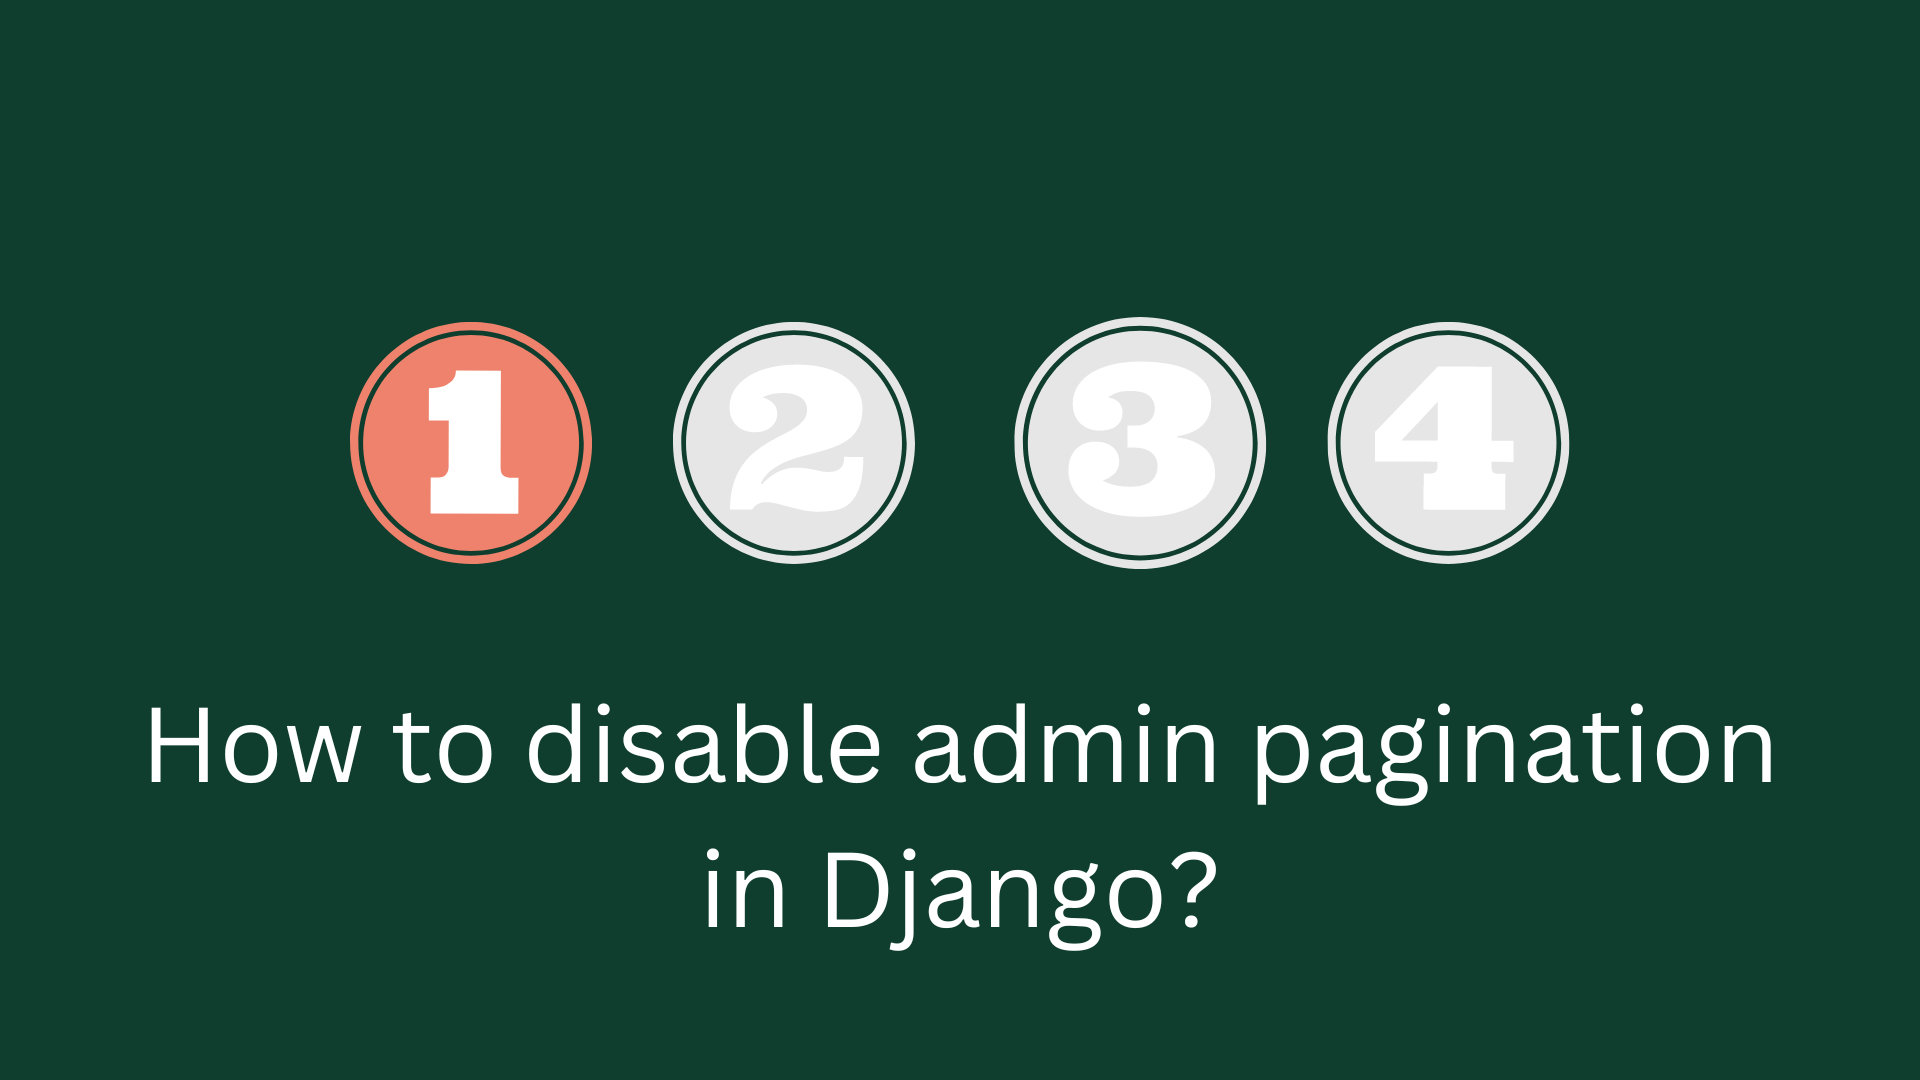 How to disable admin pagination in Django?